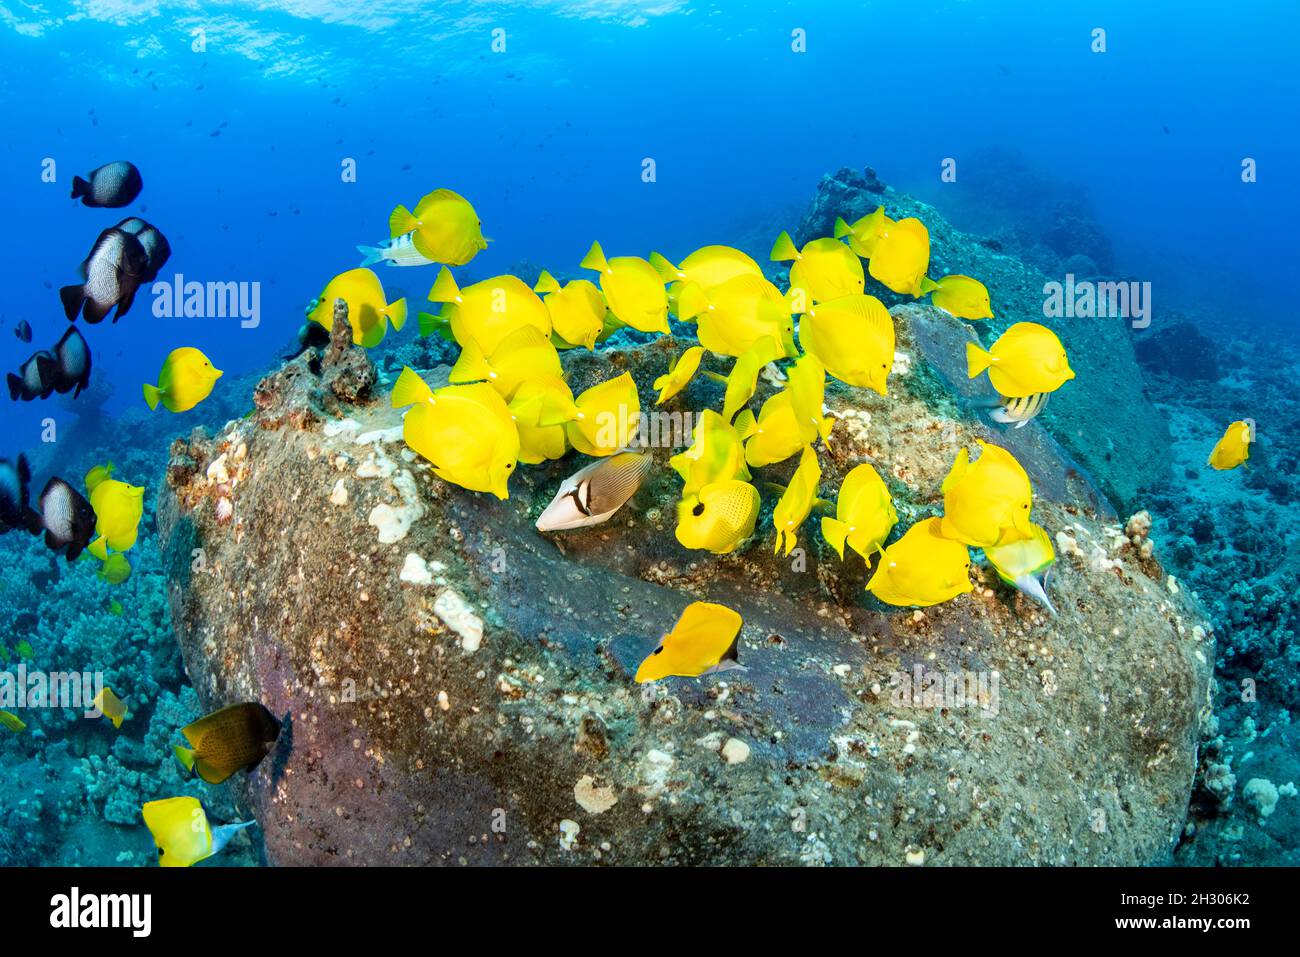 The yellow tang, Zebrasoma flavescens, is a North Pacific species that is found as far away as Japan, but nowhere is it more common than in Hawaii. Stock Photo